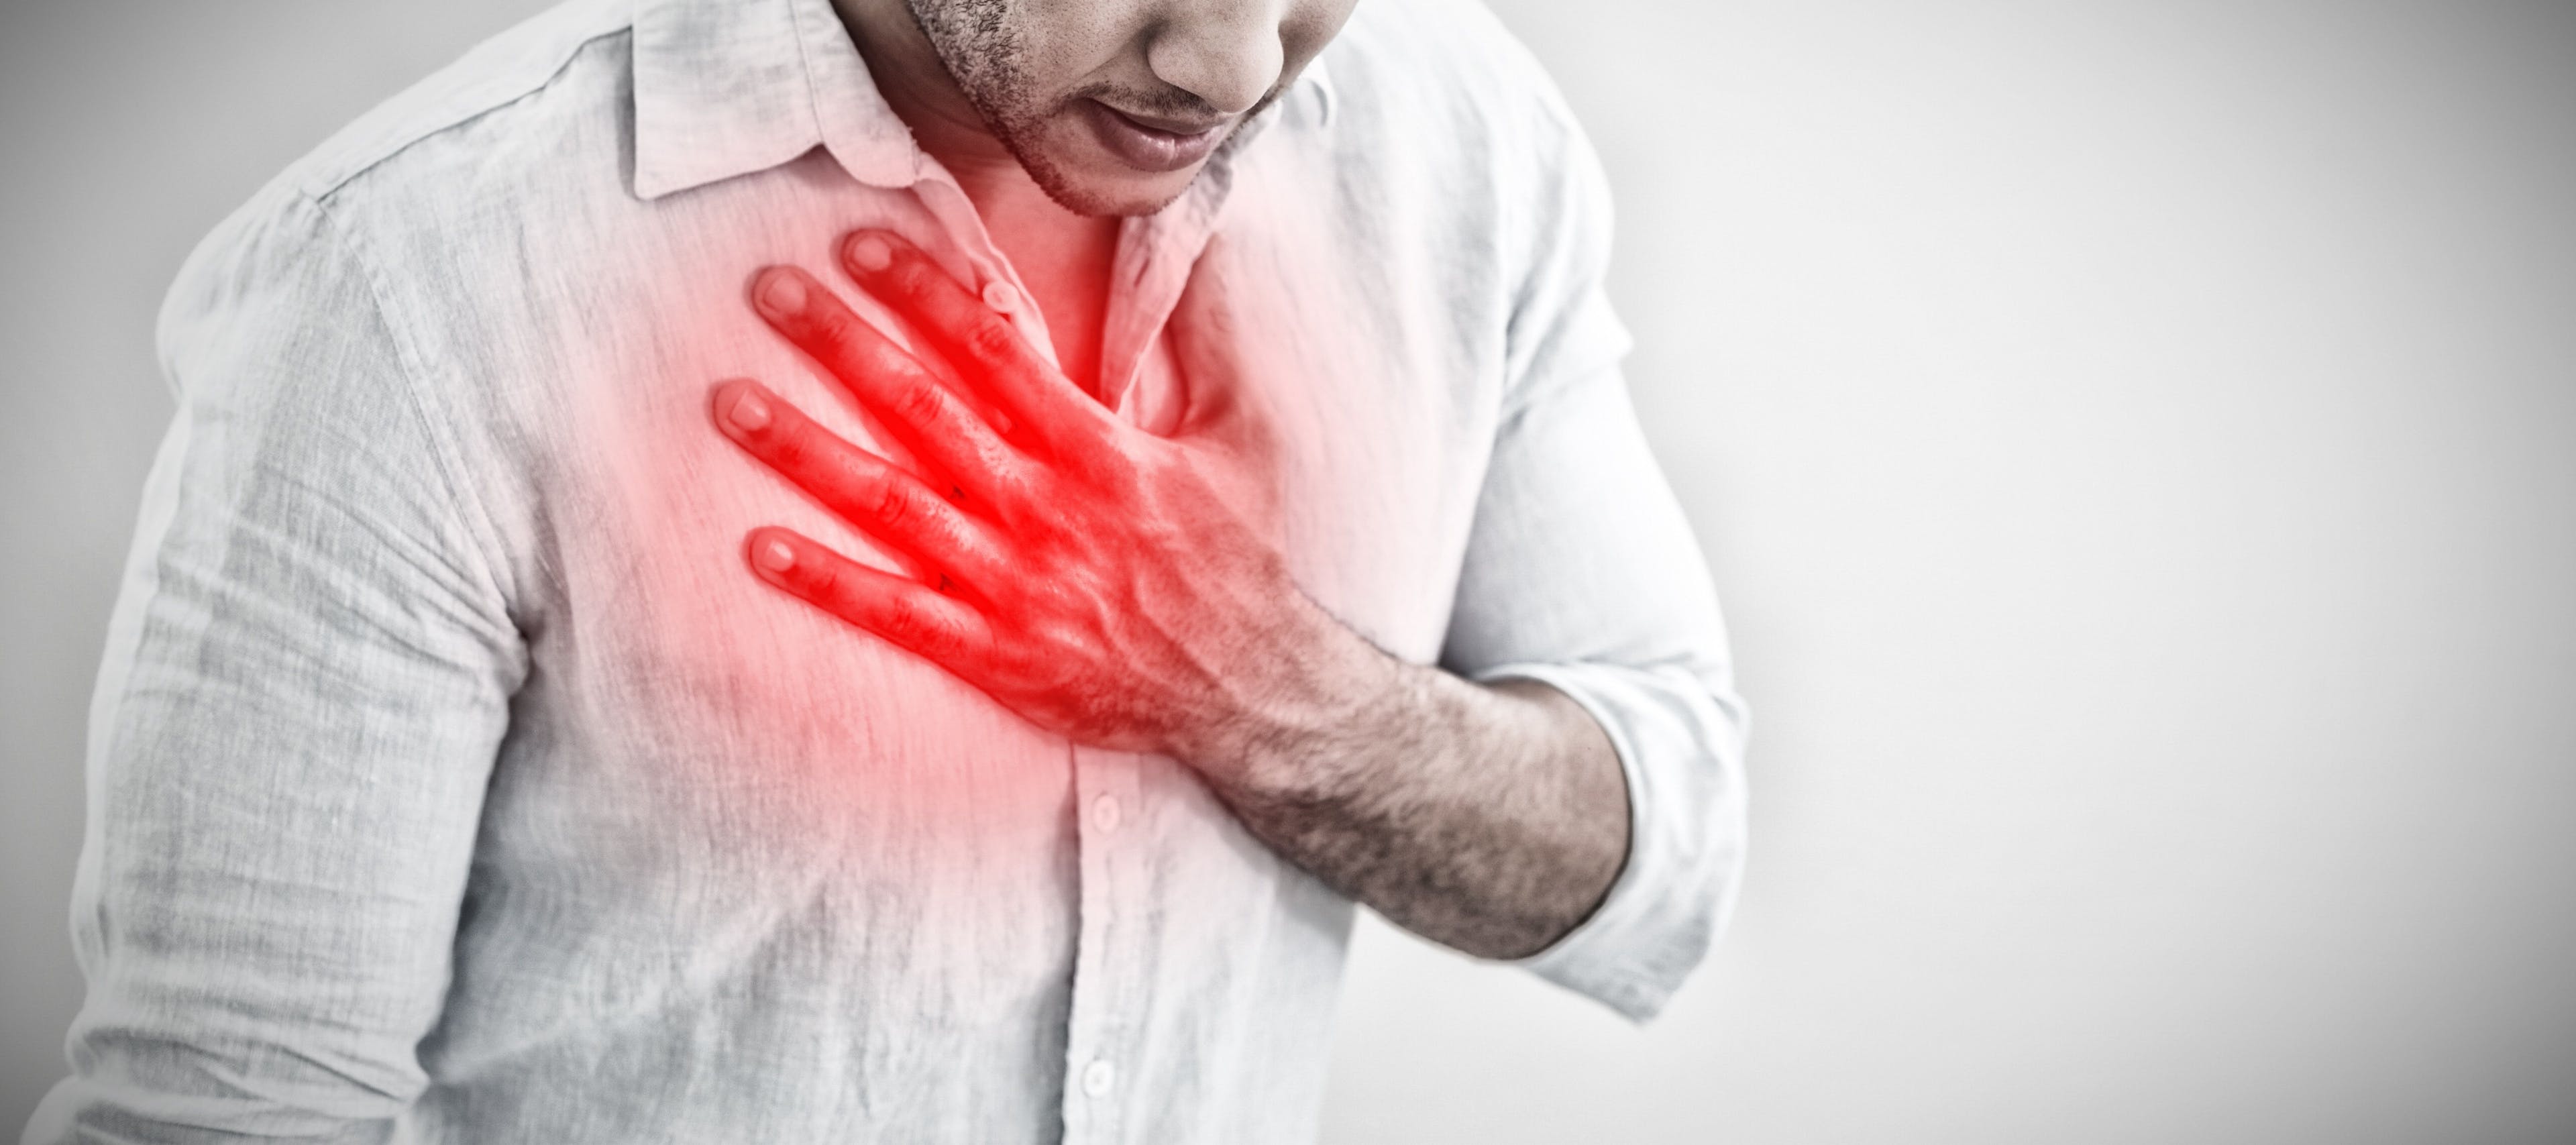 Several factors among cancer survivors, such as rural residence, low income, and low education were found to be independently associated with a higher risk of developing new-onset cardiovascular disease.